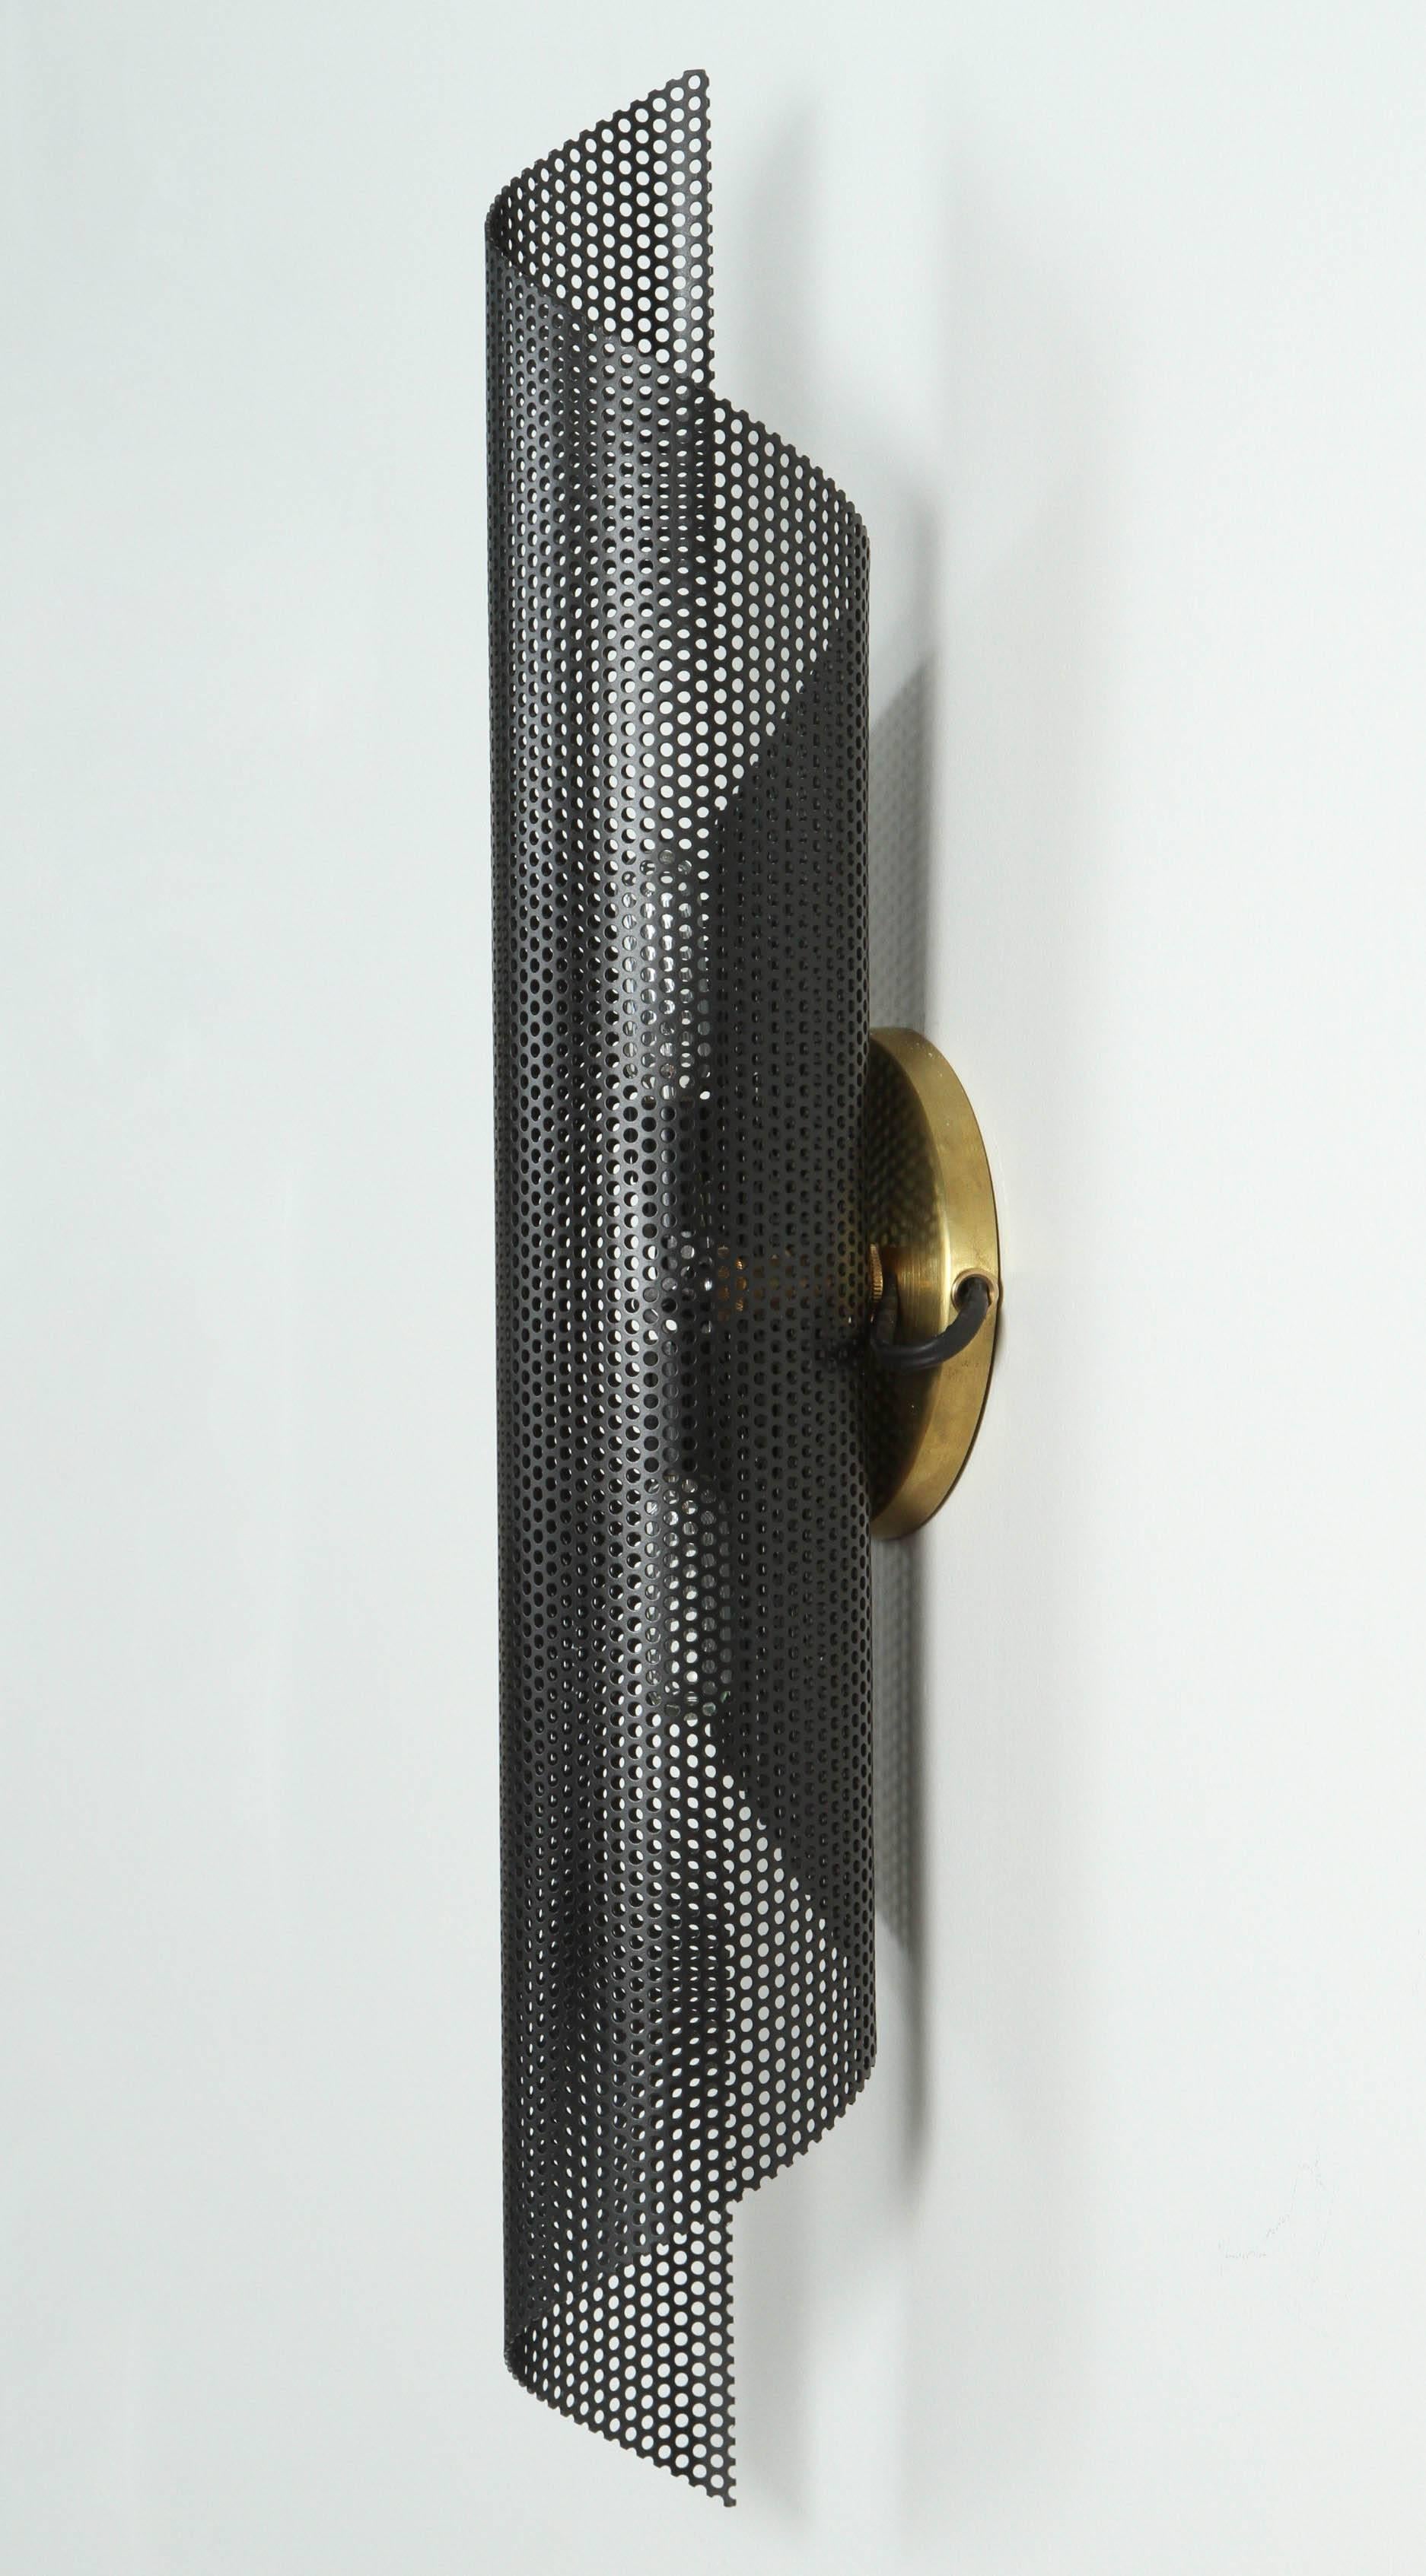 Rolled Perforated Sconce by Lawson-Fenning 1